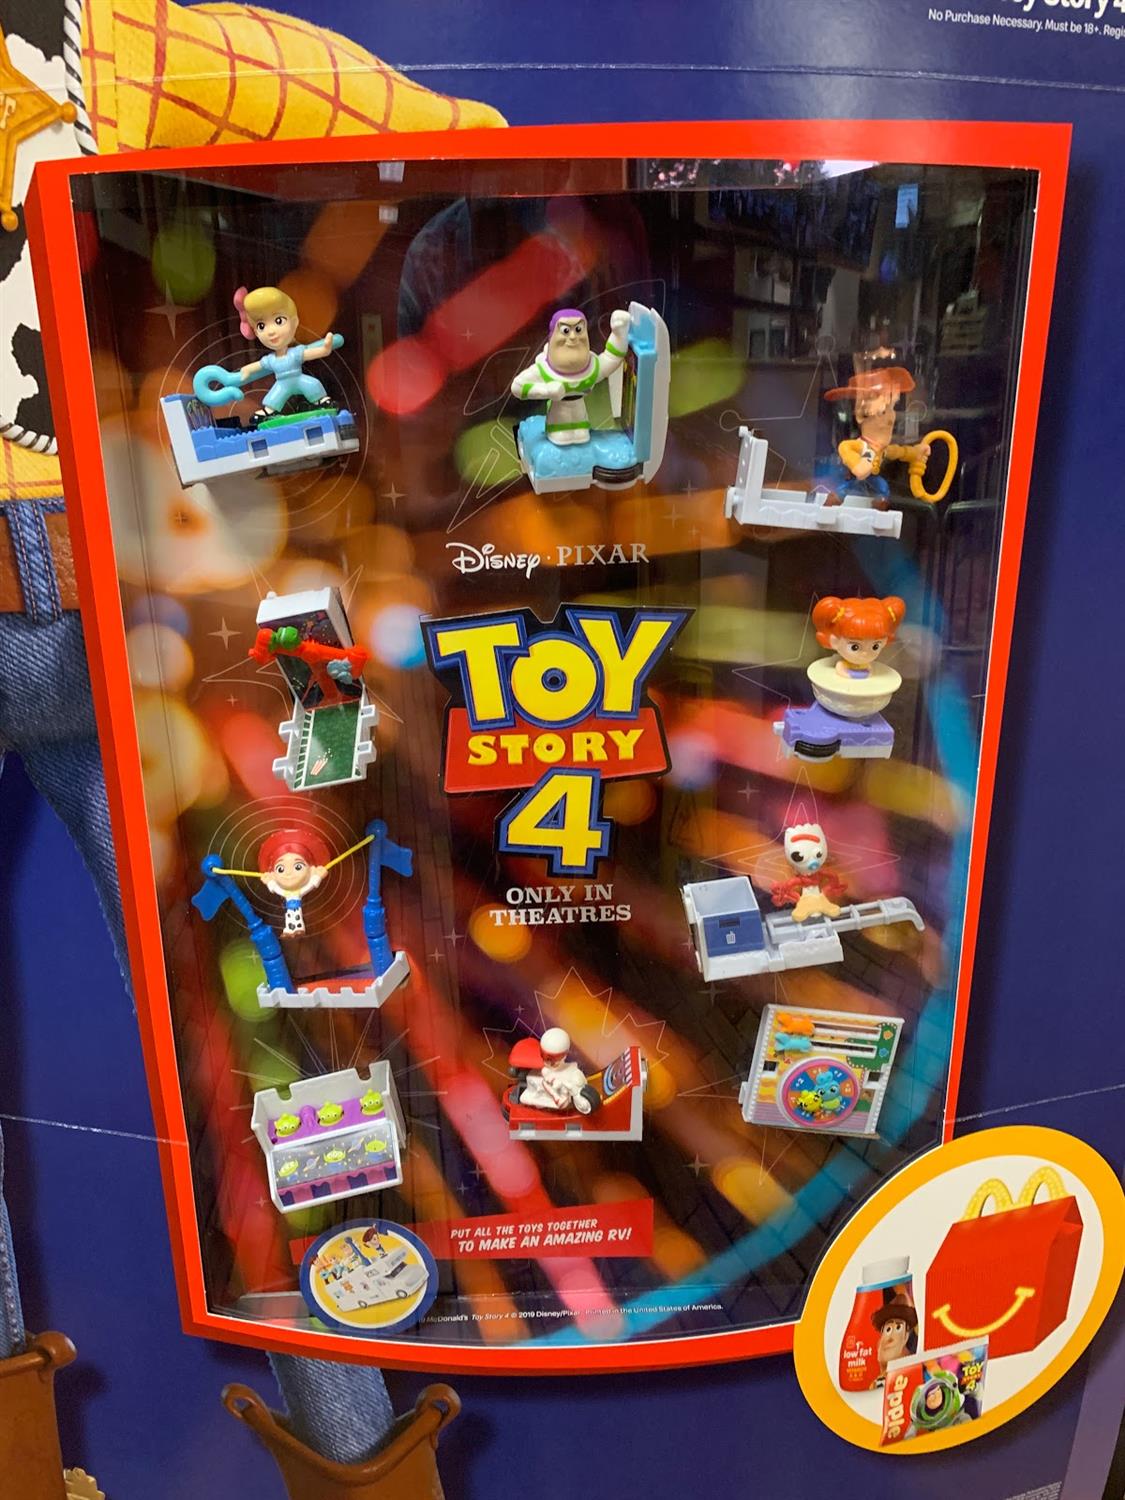 mcdonalds happy meal toy story 4 schedule